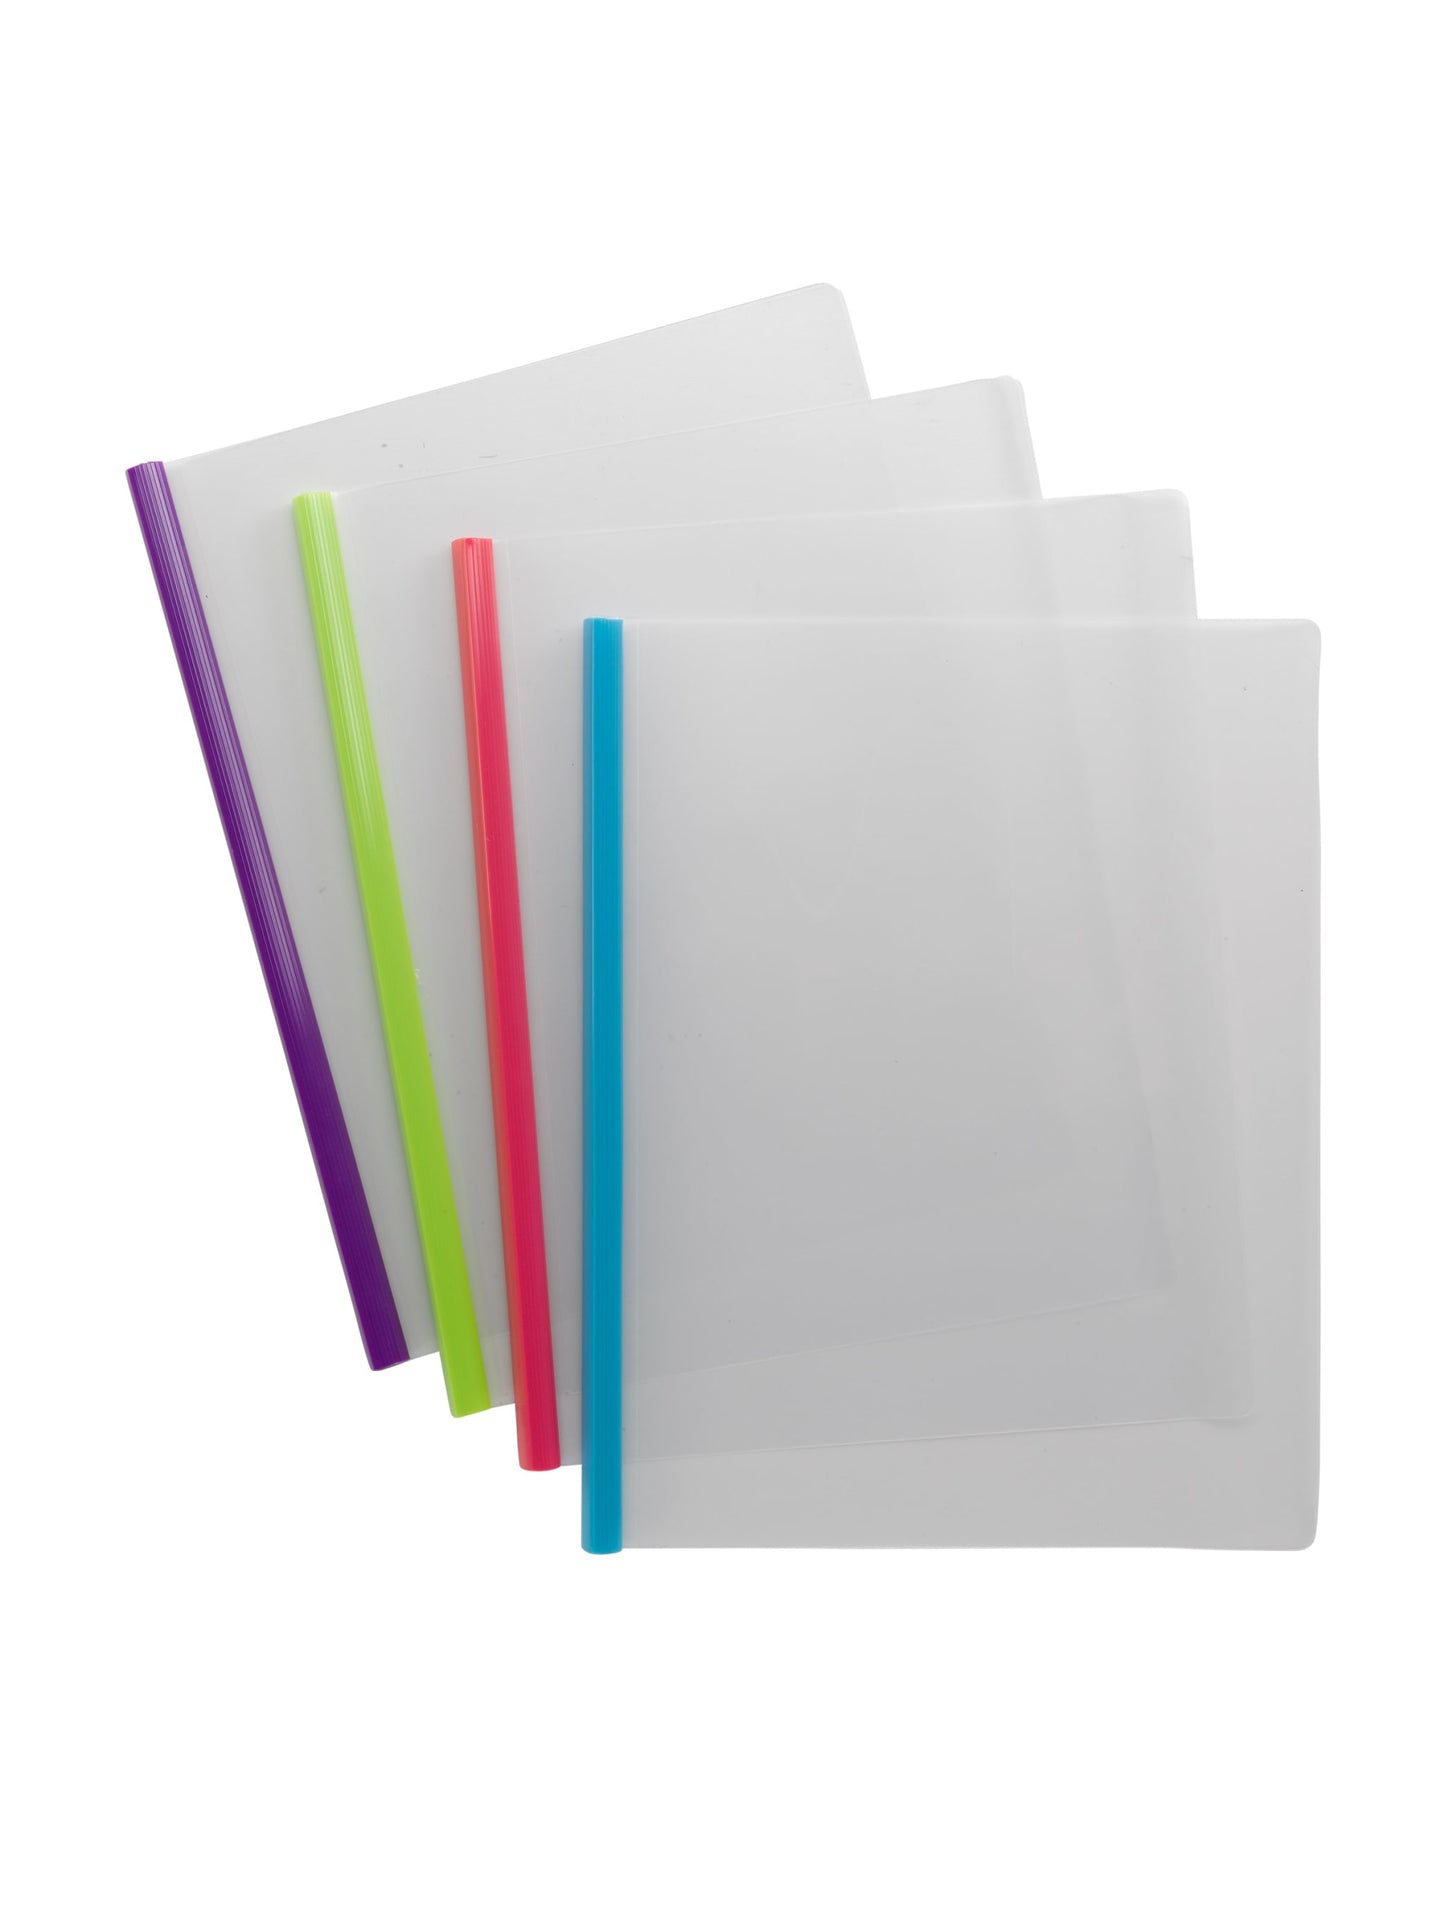 Poly Report Covers With Sliding Bar, Assorted Colors Color, Letter Size, Set of 1, 086486860482